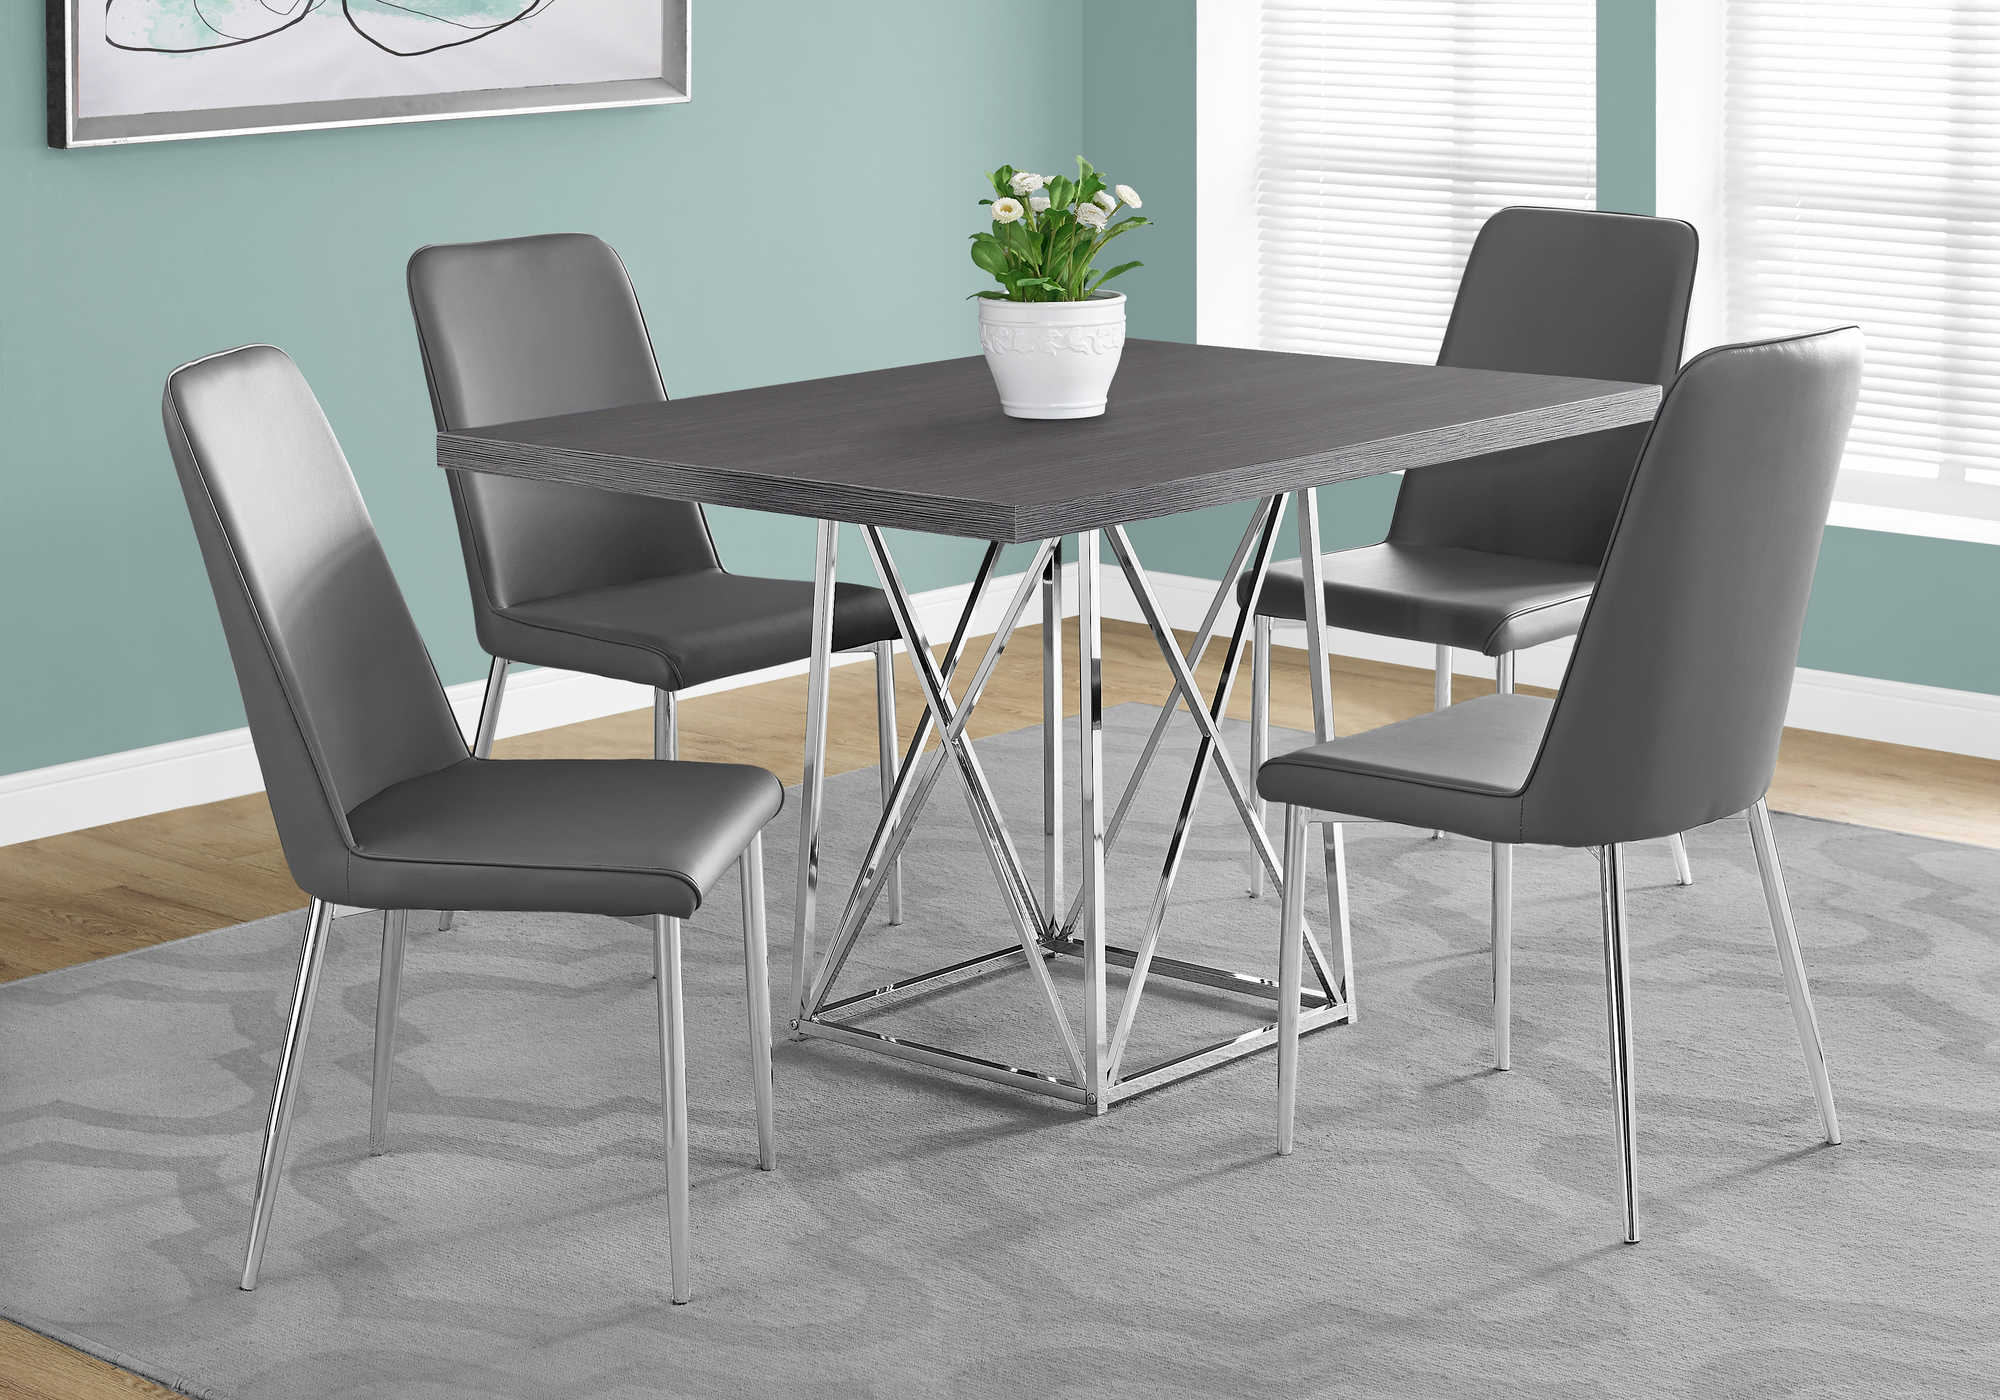 DINING CHAIR - 2PCS / 37"H / GREY LEATHER-LOOK / CHROME